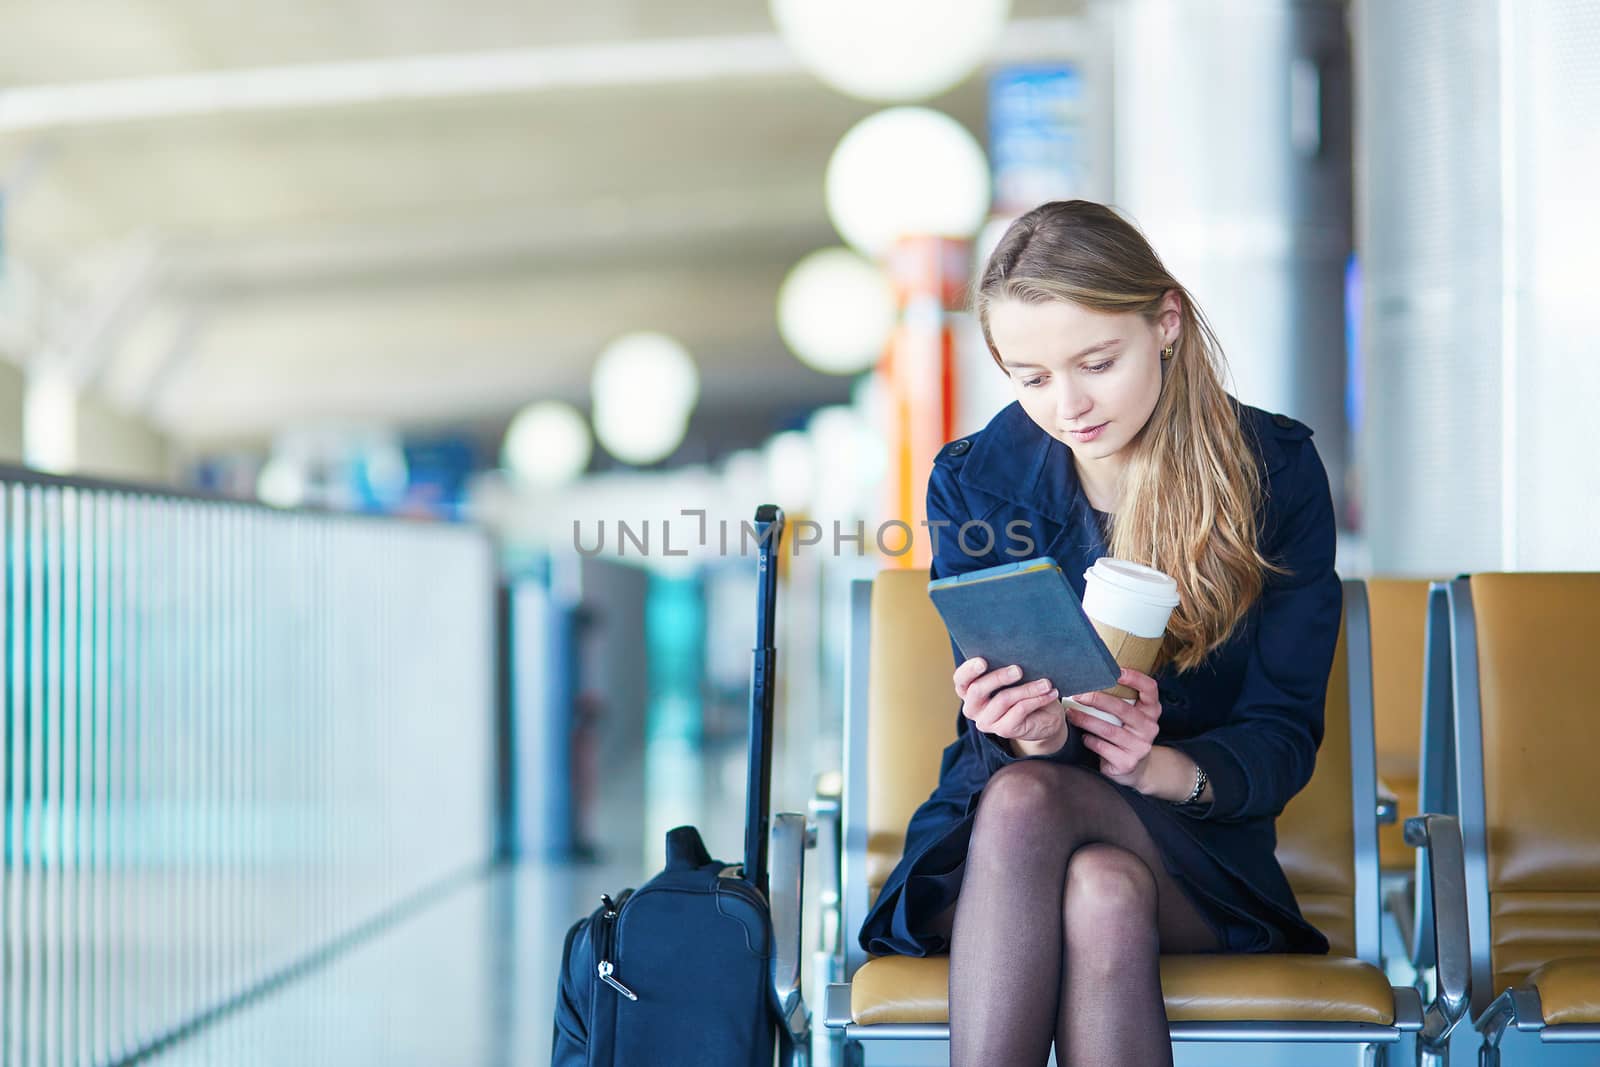 Young woman in international airport, reading and drinking coffee while waiting for her flight